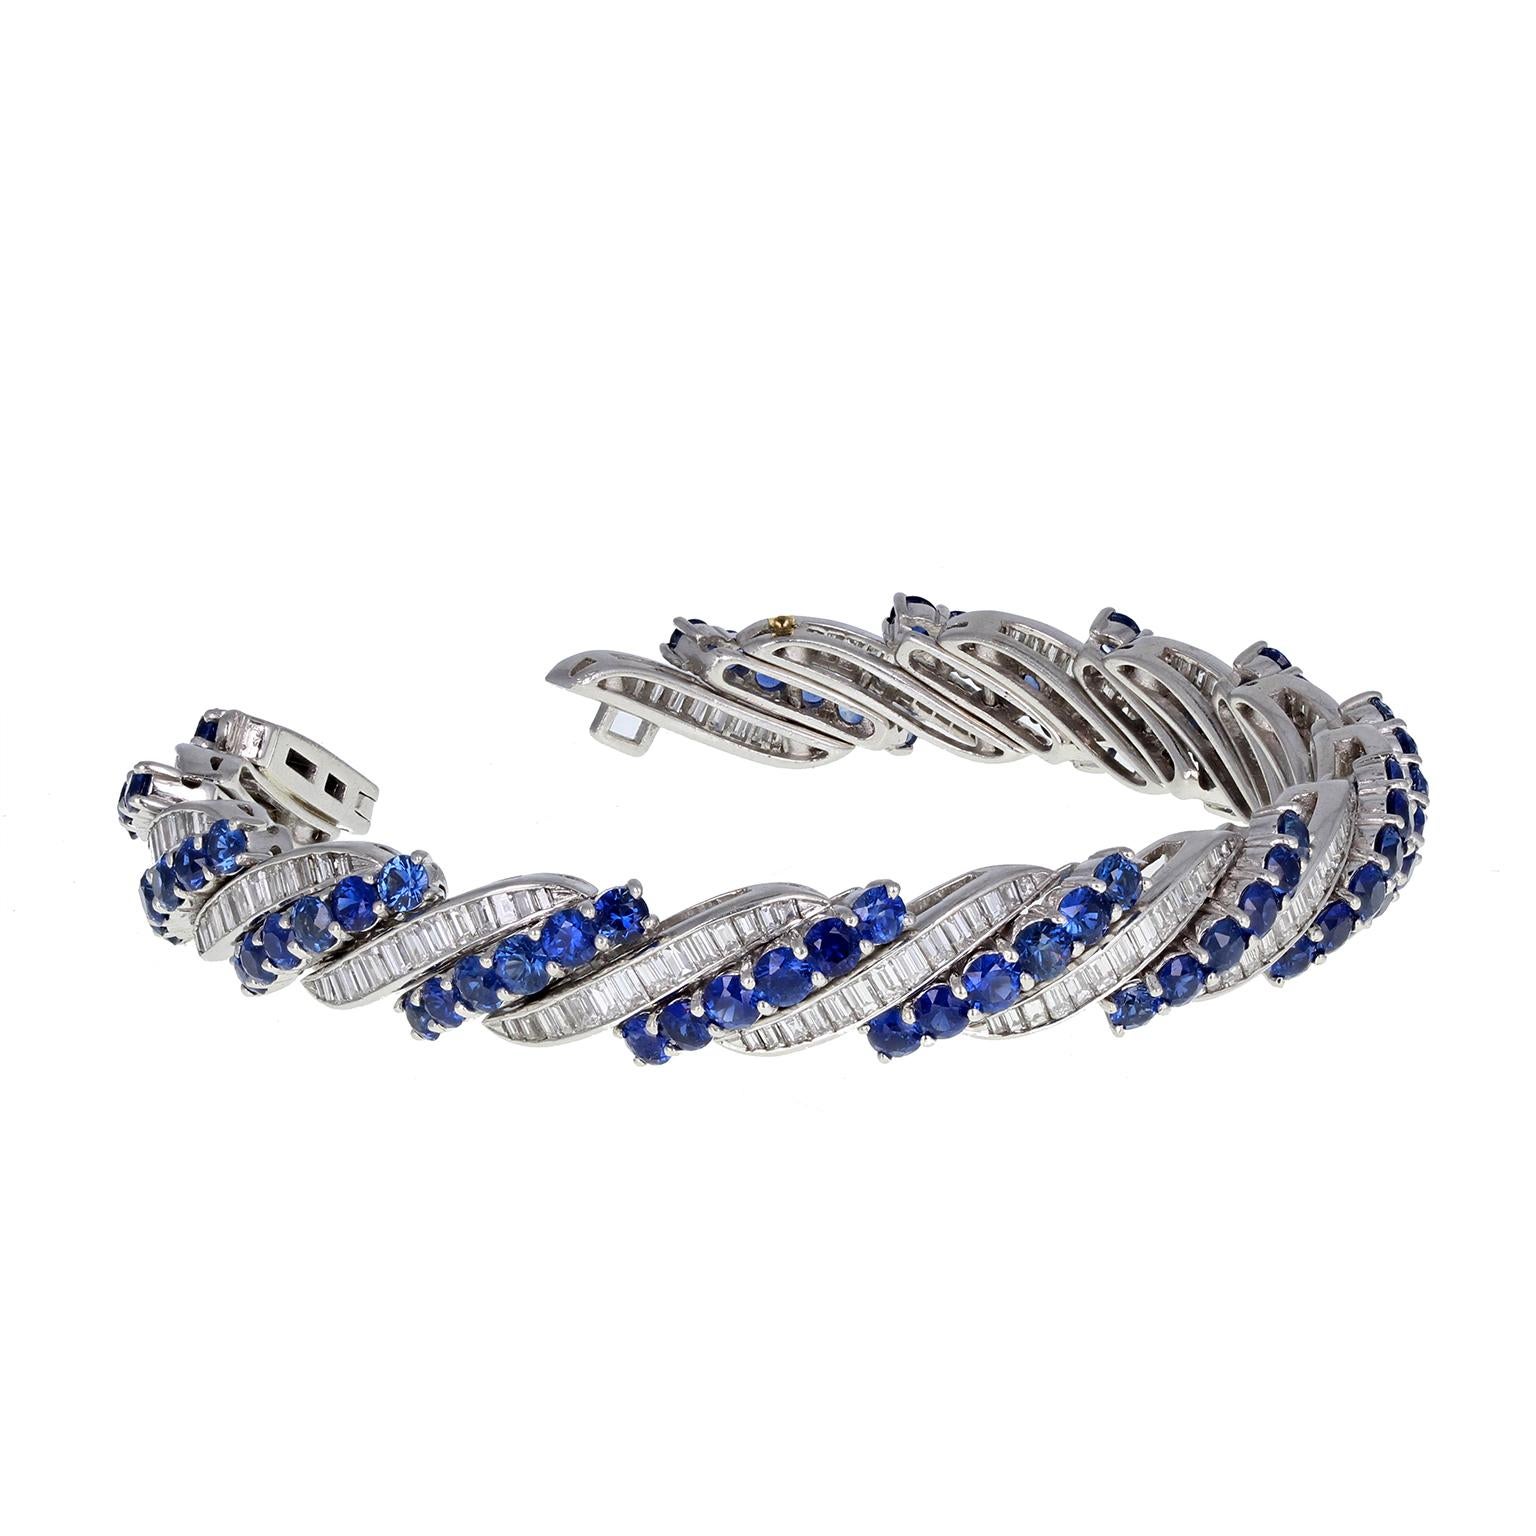 Vintage Platinum Blue Sapphire Diamond Bracelet In Excellent Condition For Sale In Newcastle Upon Tyne, GB